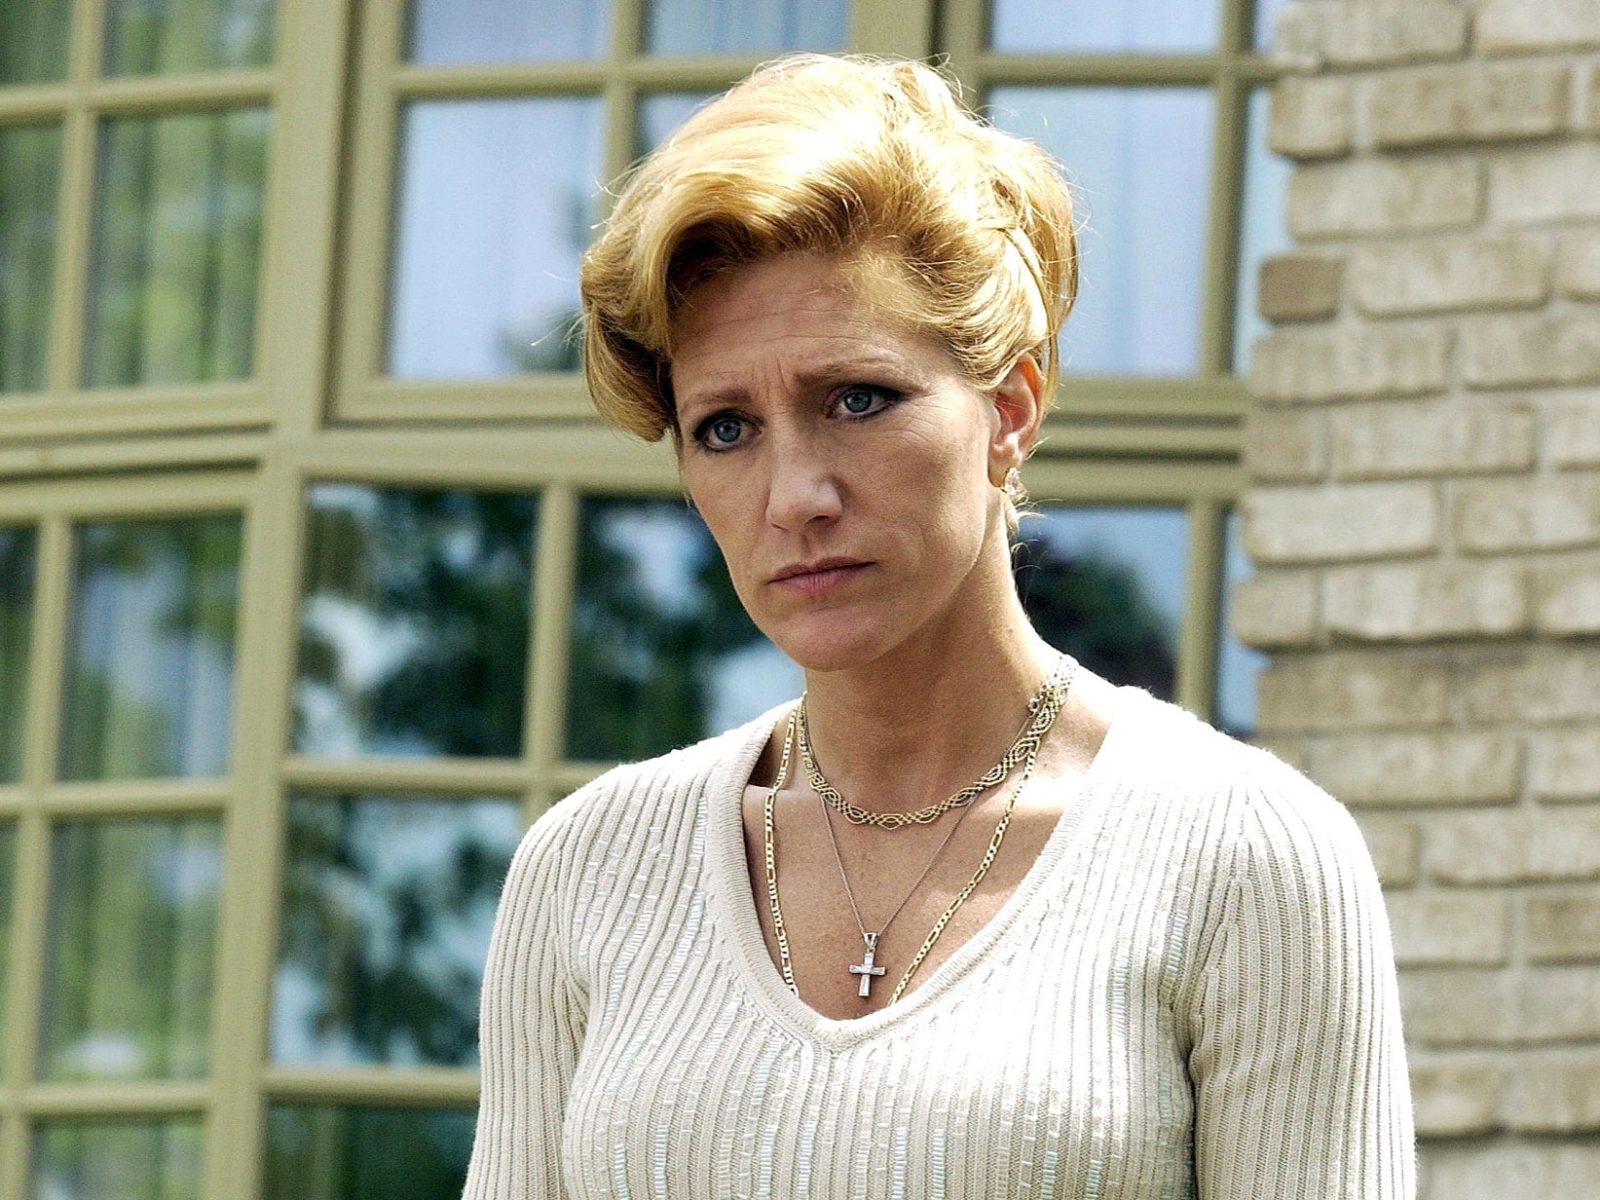 Anyone With the Most Basic TV Knowledge Should Get 12/15 on This Quiz Carmela Soprano